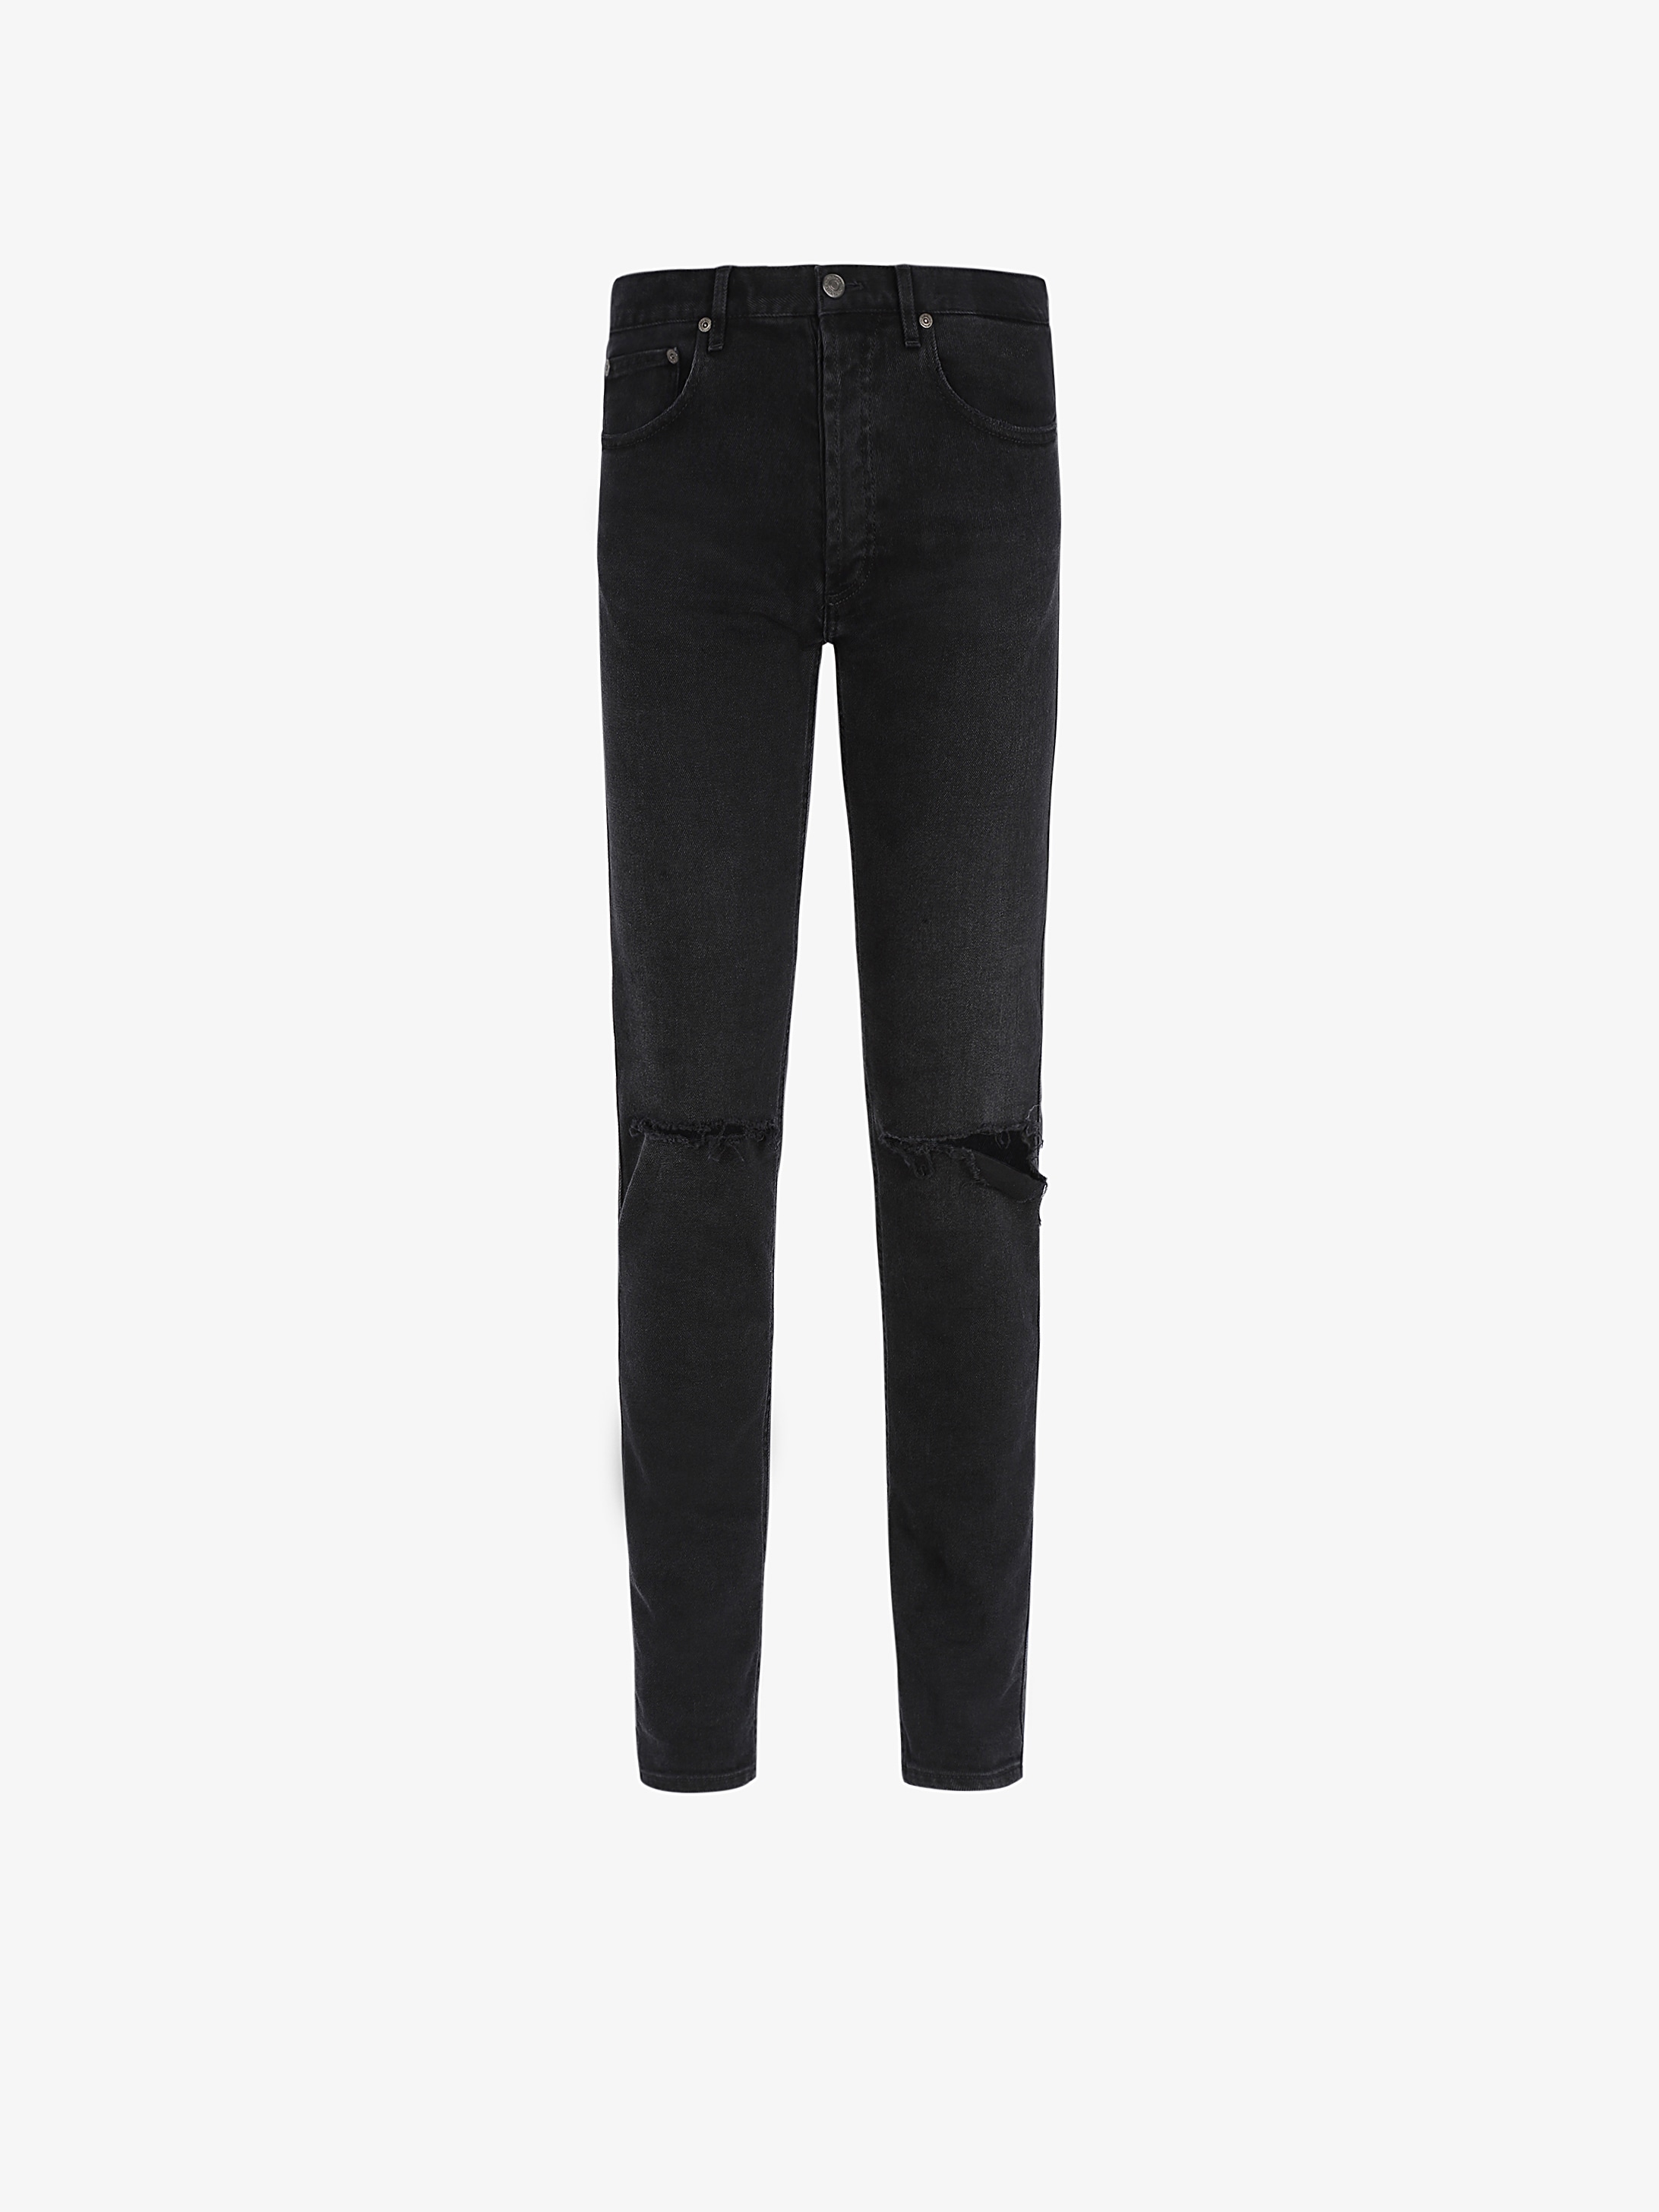 Destroyed skinny jeans | GIVENCHY Paris